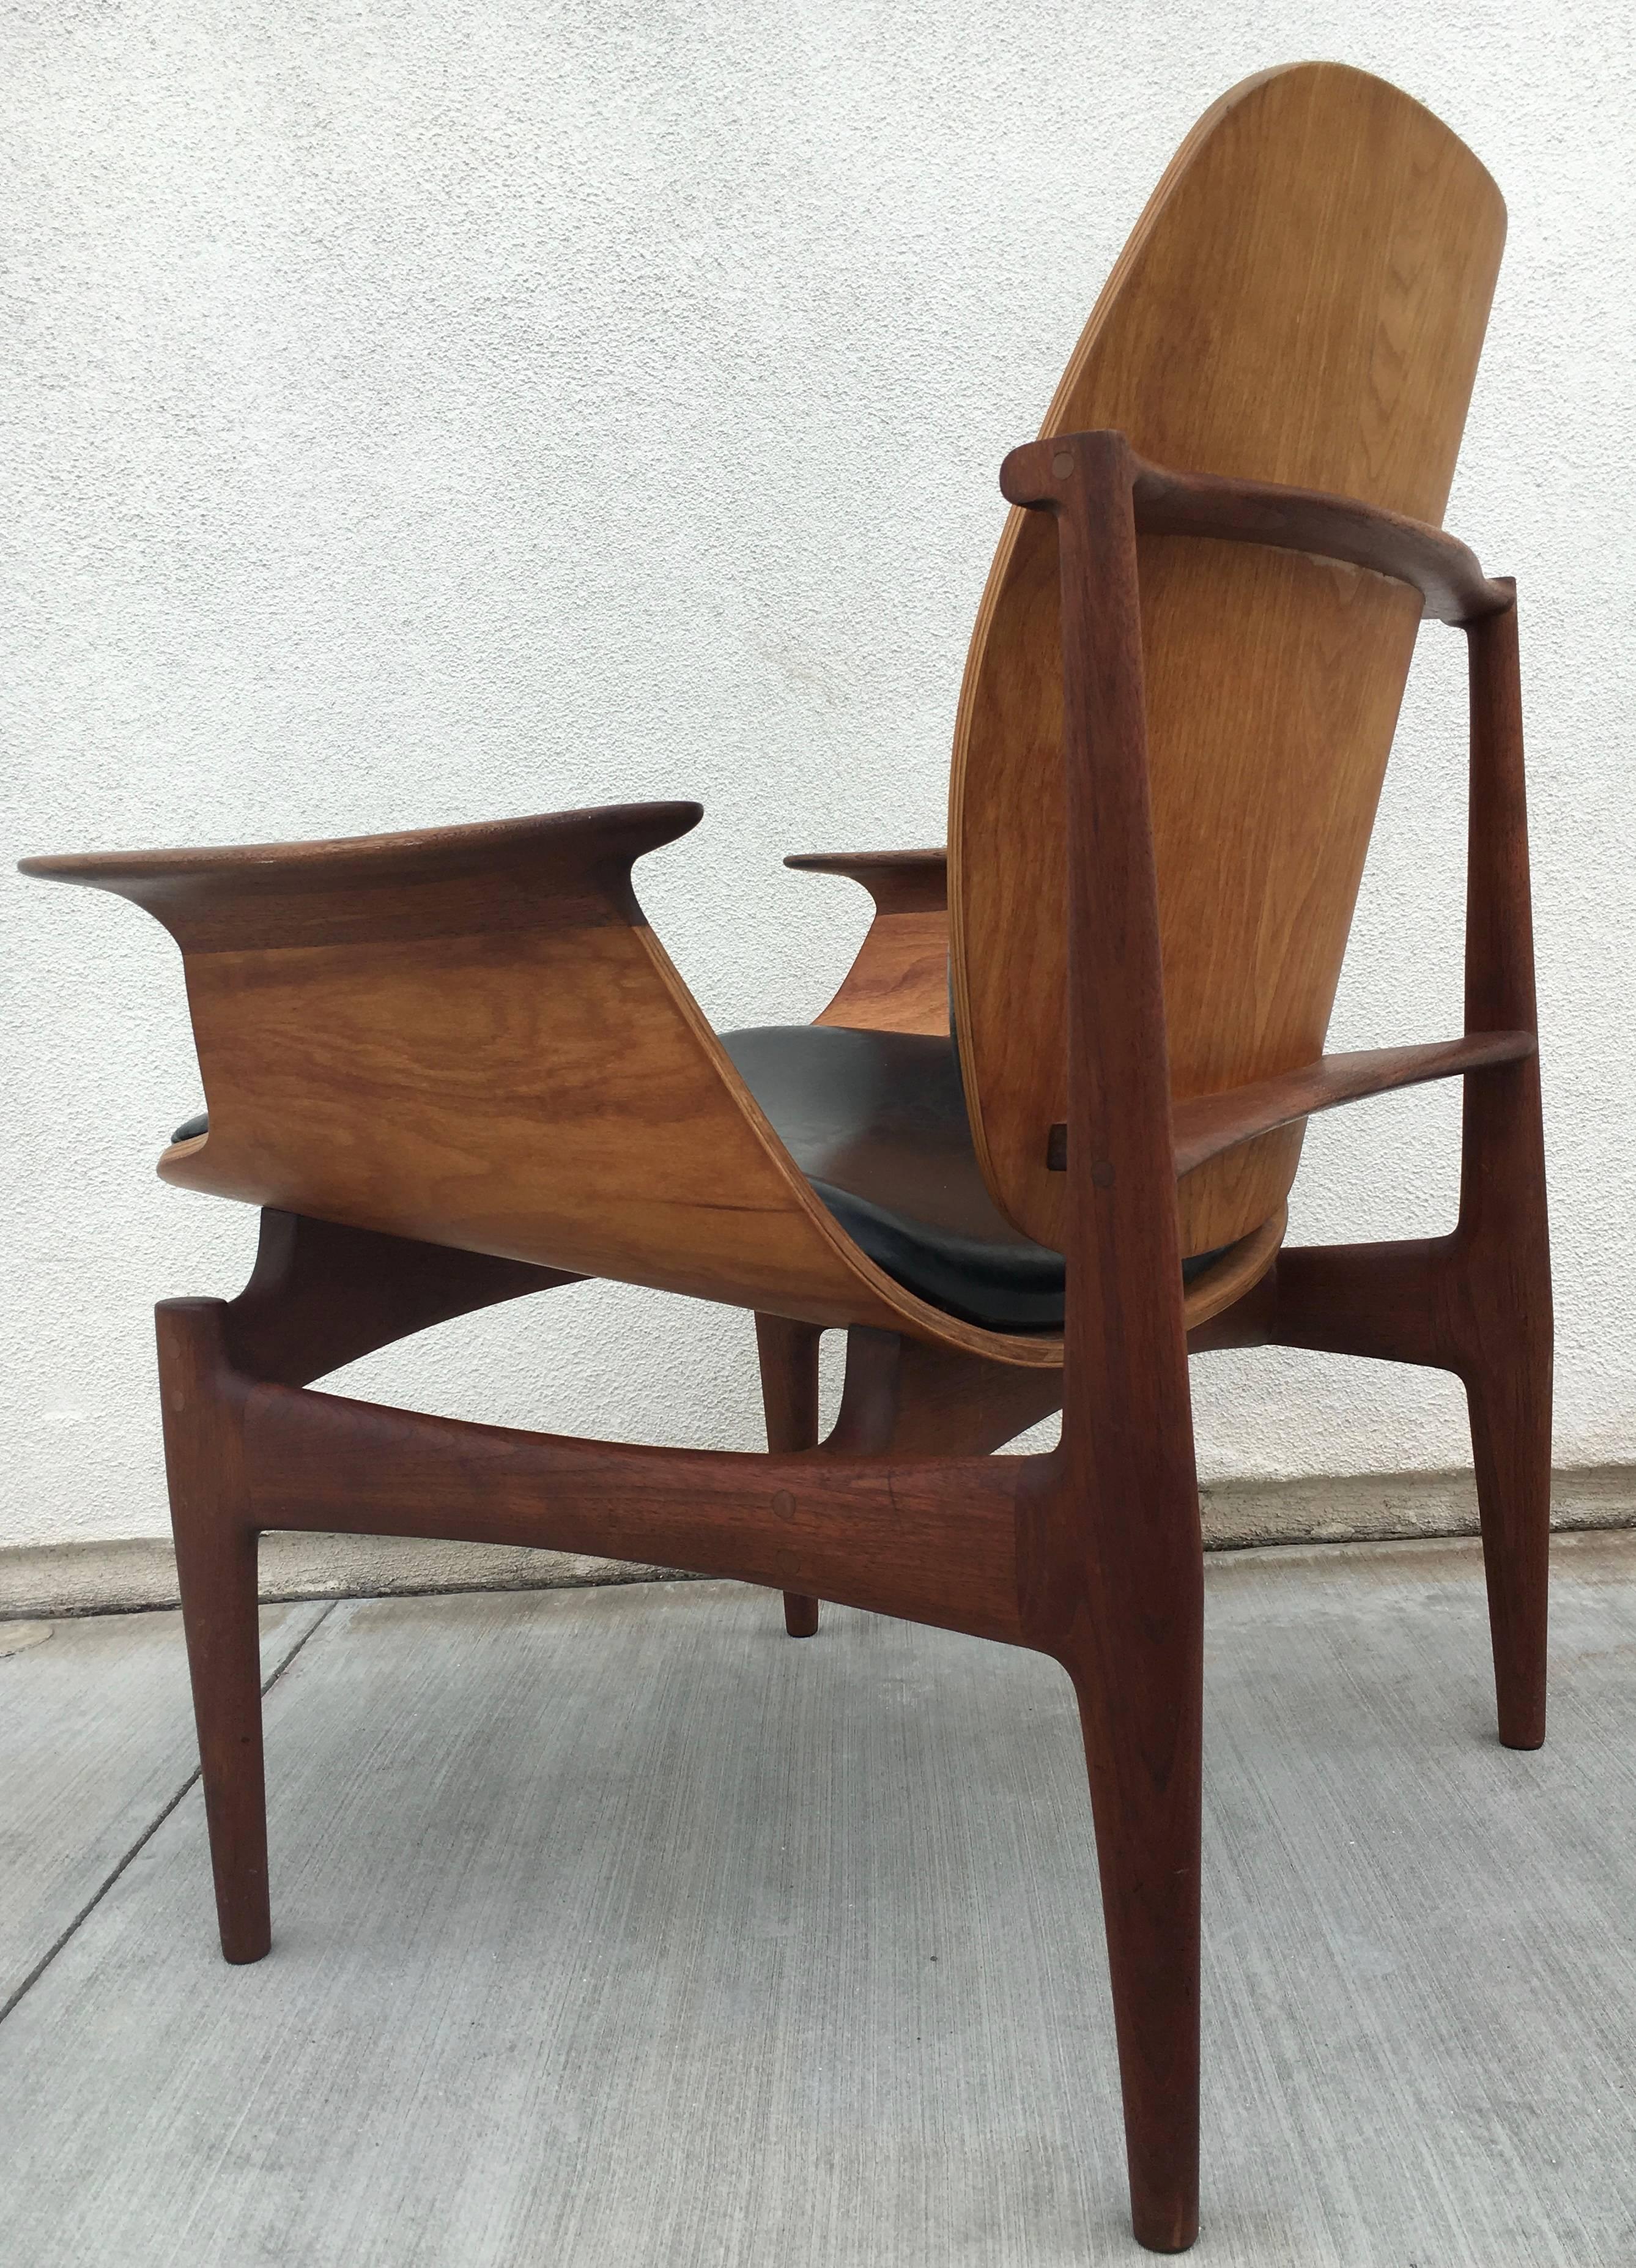 American Stunning One off 1/1 Studio Chair by John McWilliams, California, circa 1960s For Sale